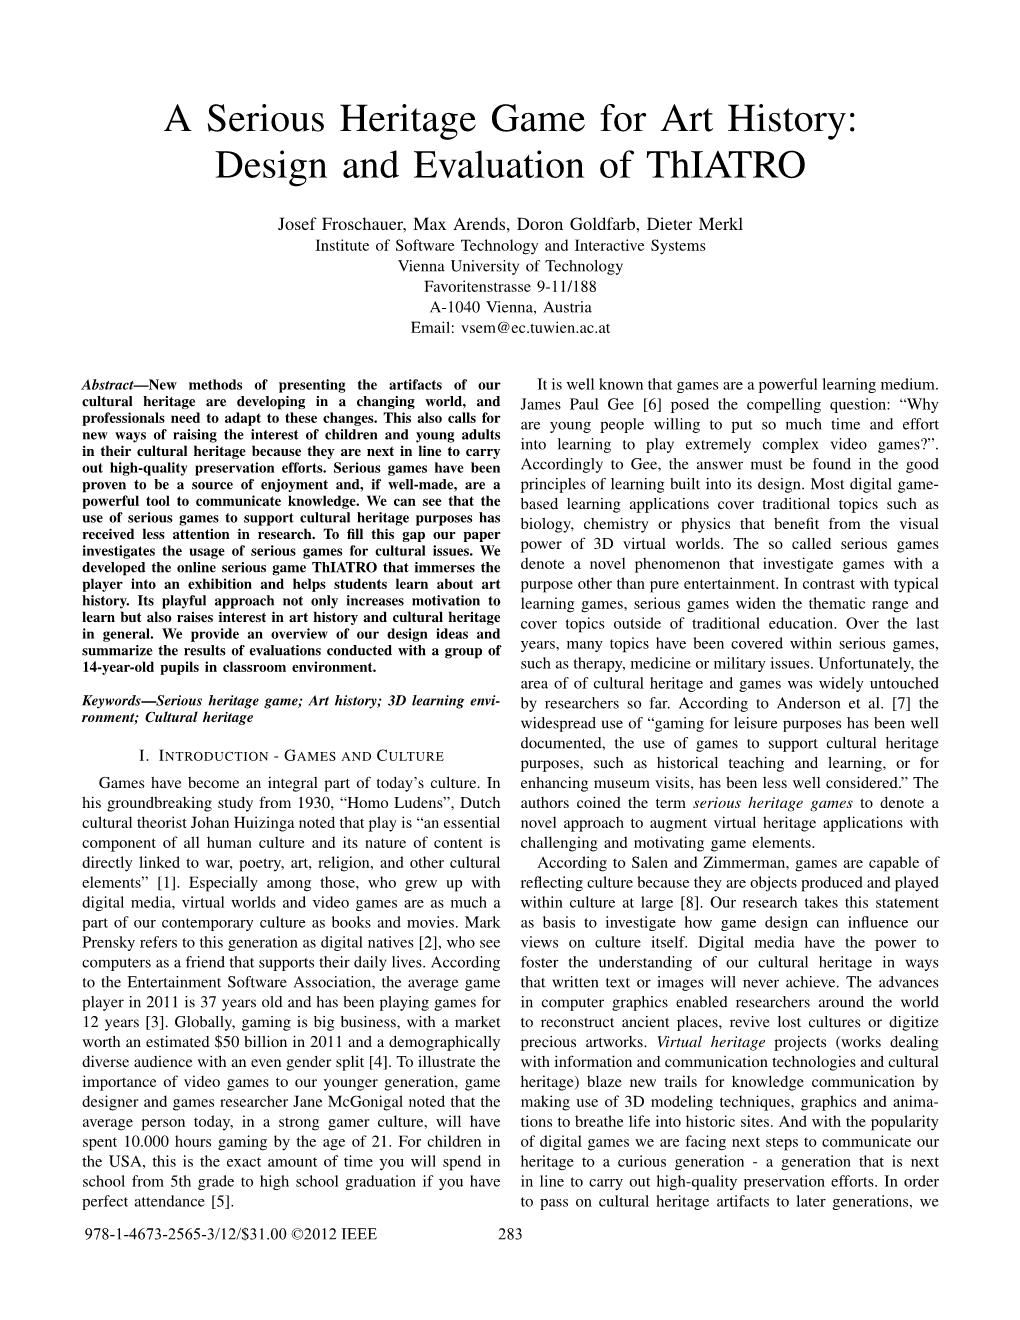 A Serious Heritage Game for Art History: Design and Evaluation of Thiatro